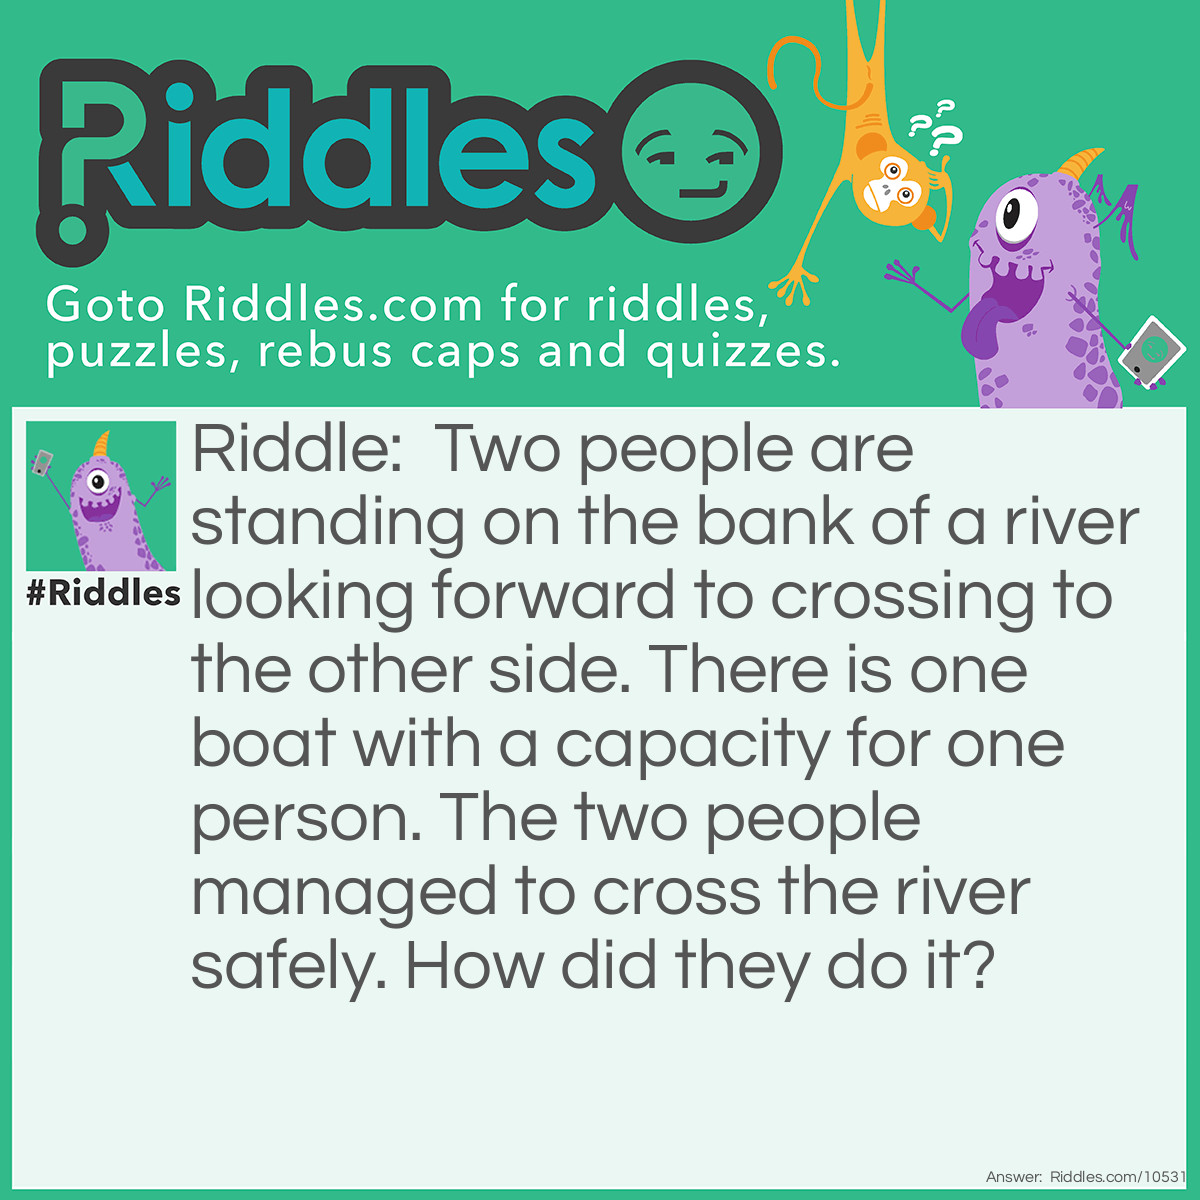 Riddle: Two people are standing on the bank of a river looking forward to crossing to the other side. There is one boat with a capacity for one person. The two people managed to cross the river safely. How did they do it? Answer: The two were on opposite sides of the river.